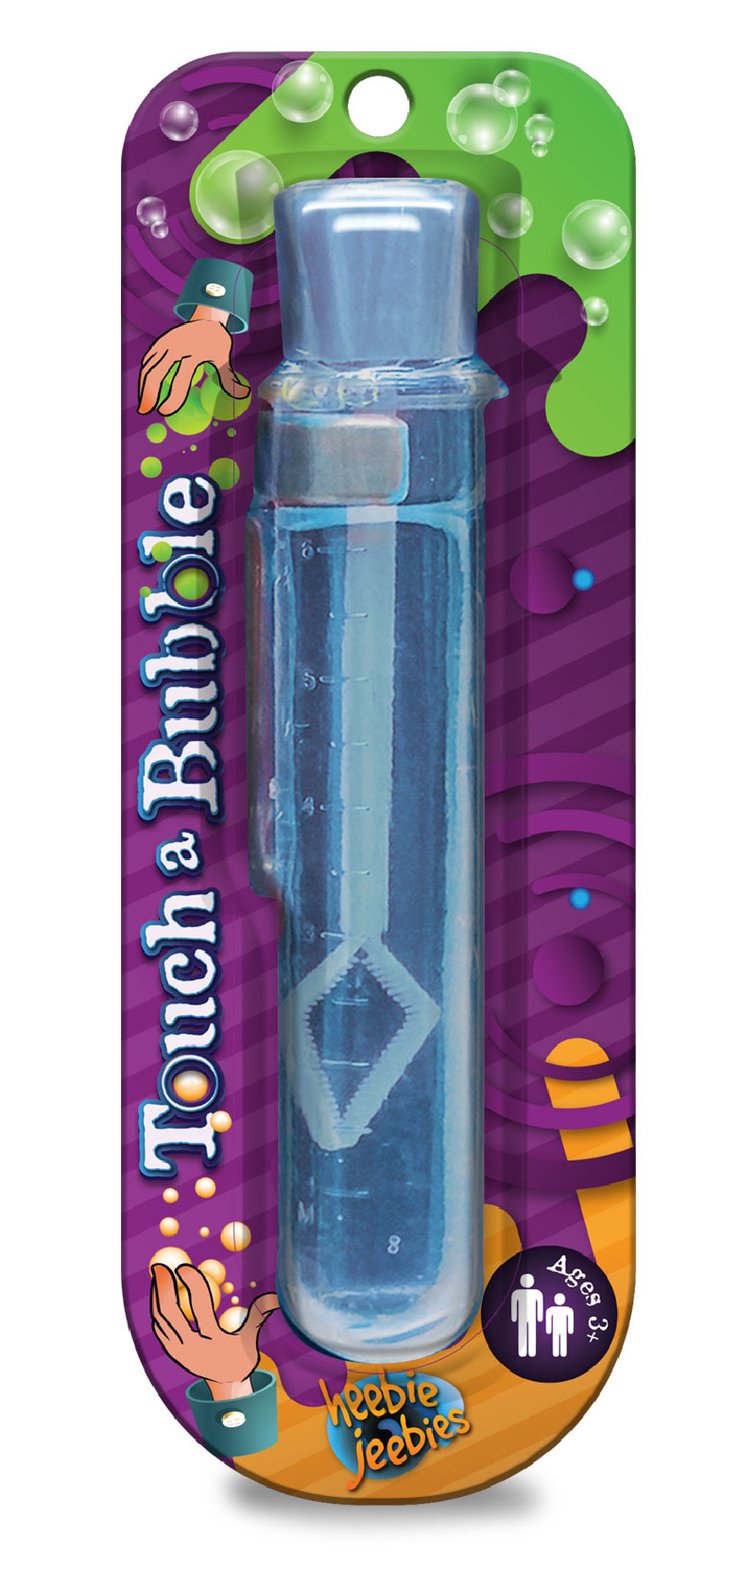 heebie jeebies touch a bubble large bubble blowers for children's outdoor play